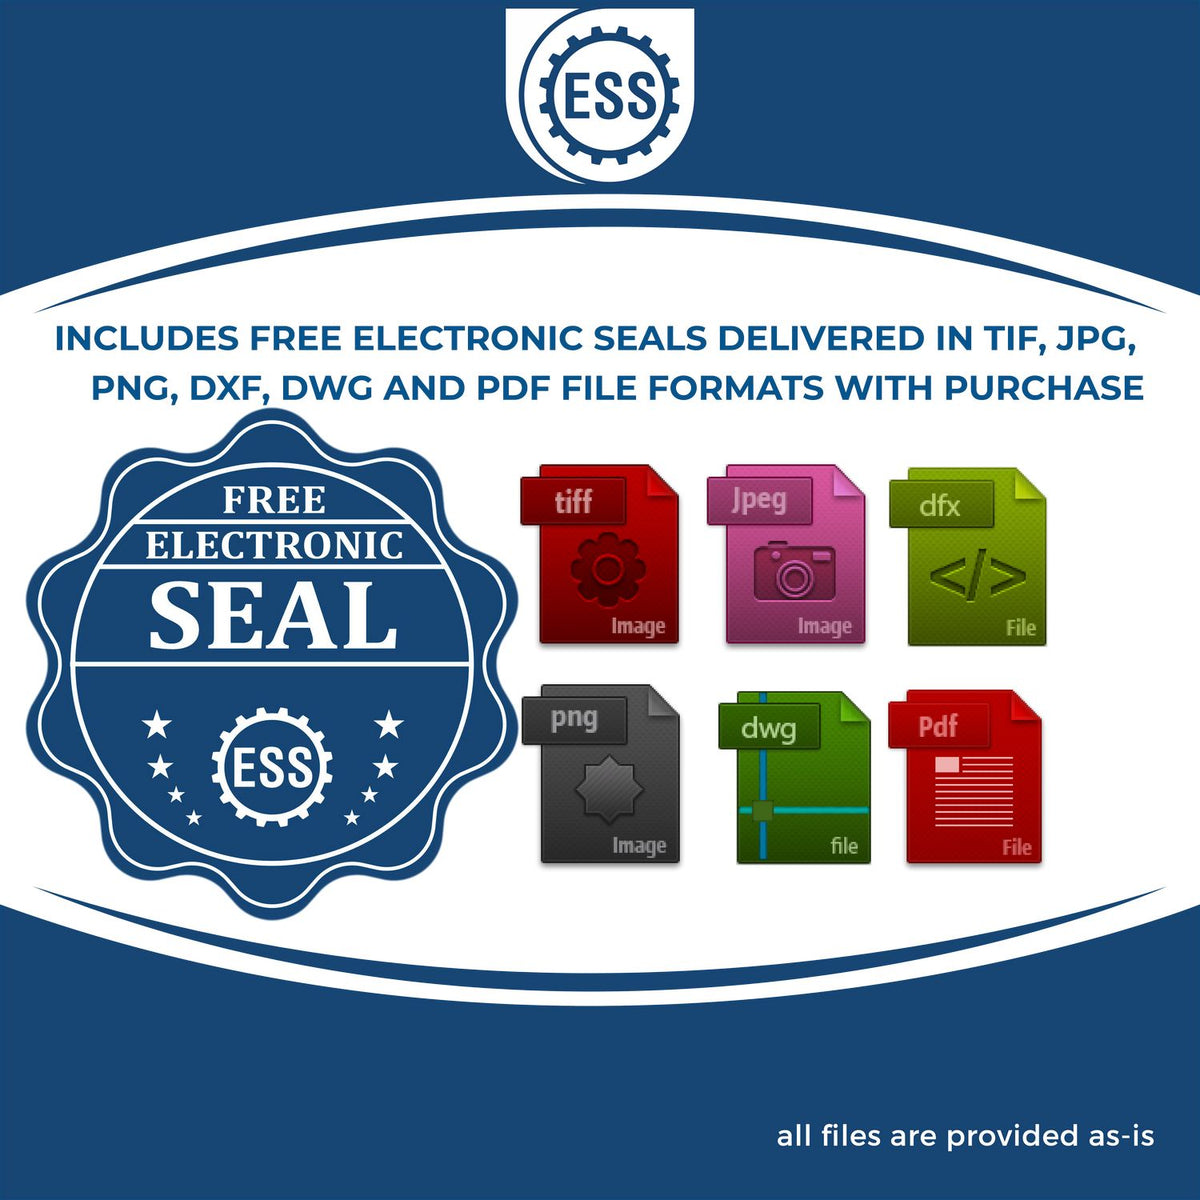 An infographic for the free electronic seal for the Self-Inking Guam Geologist Stamp illustrating the different file type icons such as DXF, DWG, TIF, JPG and PNG.